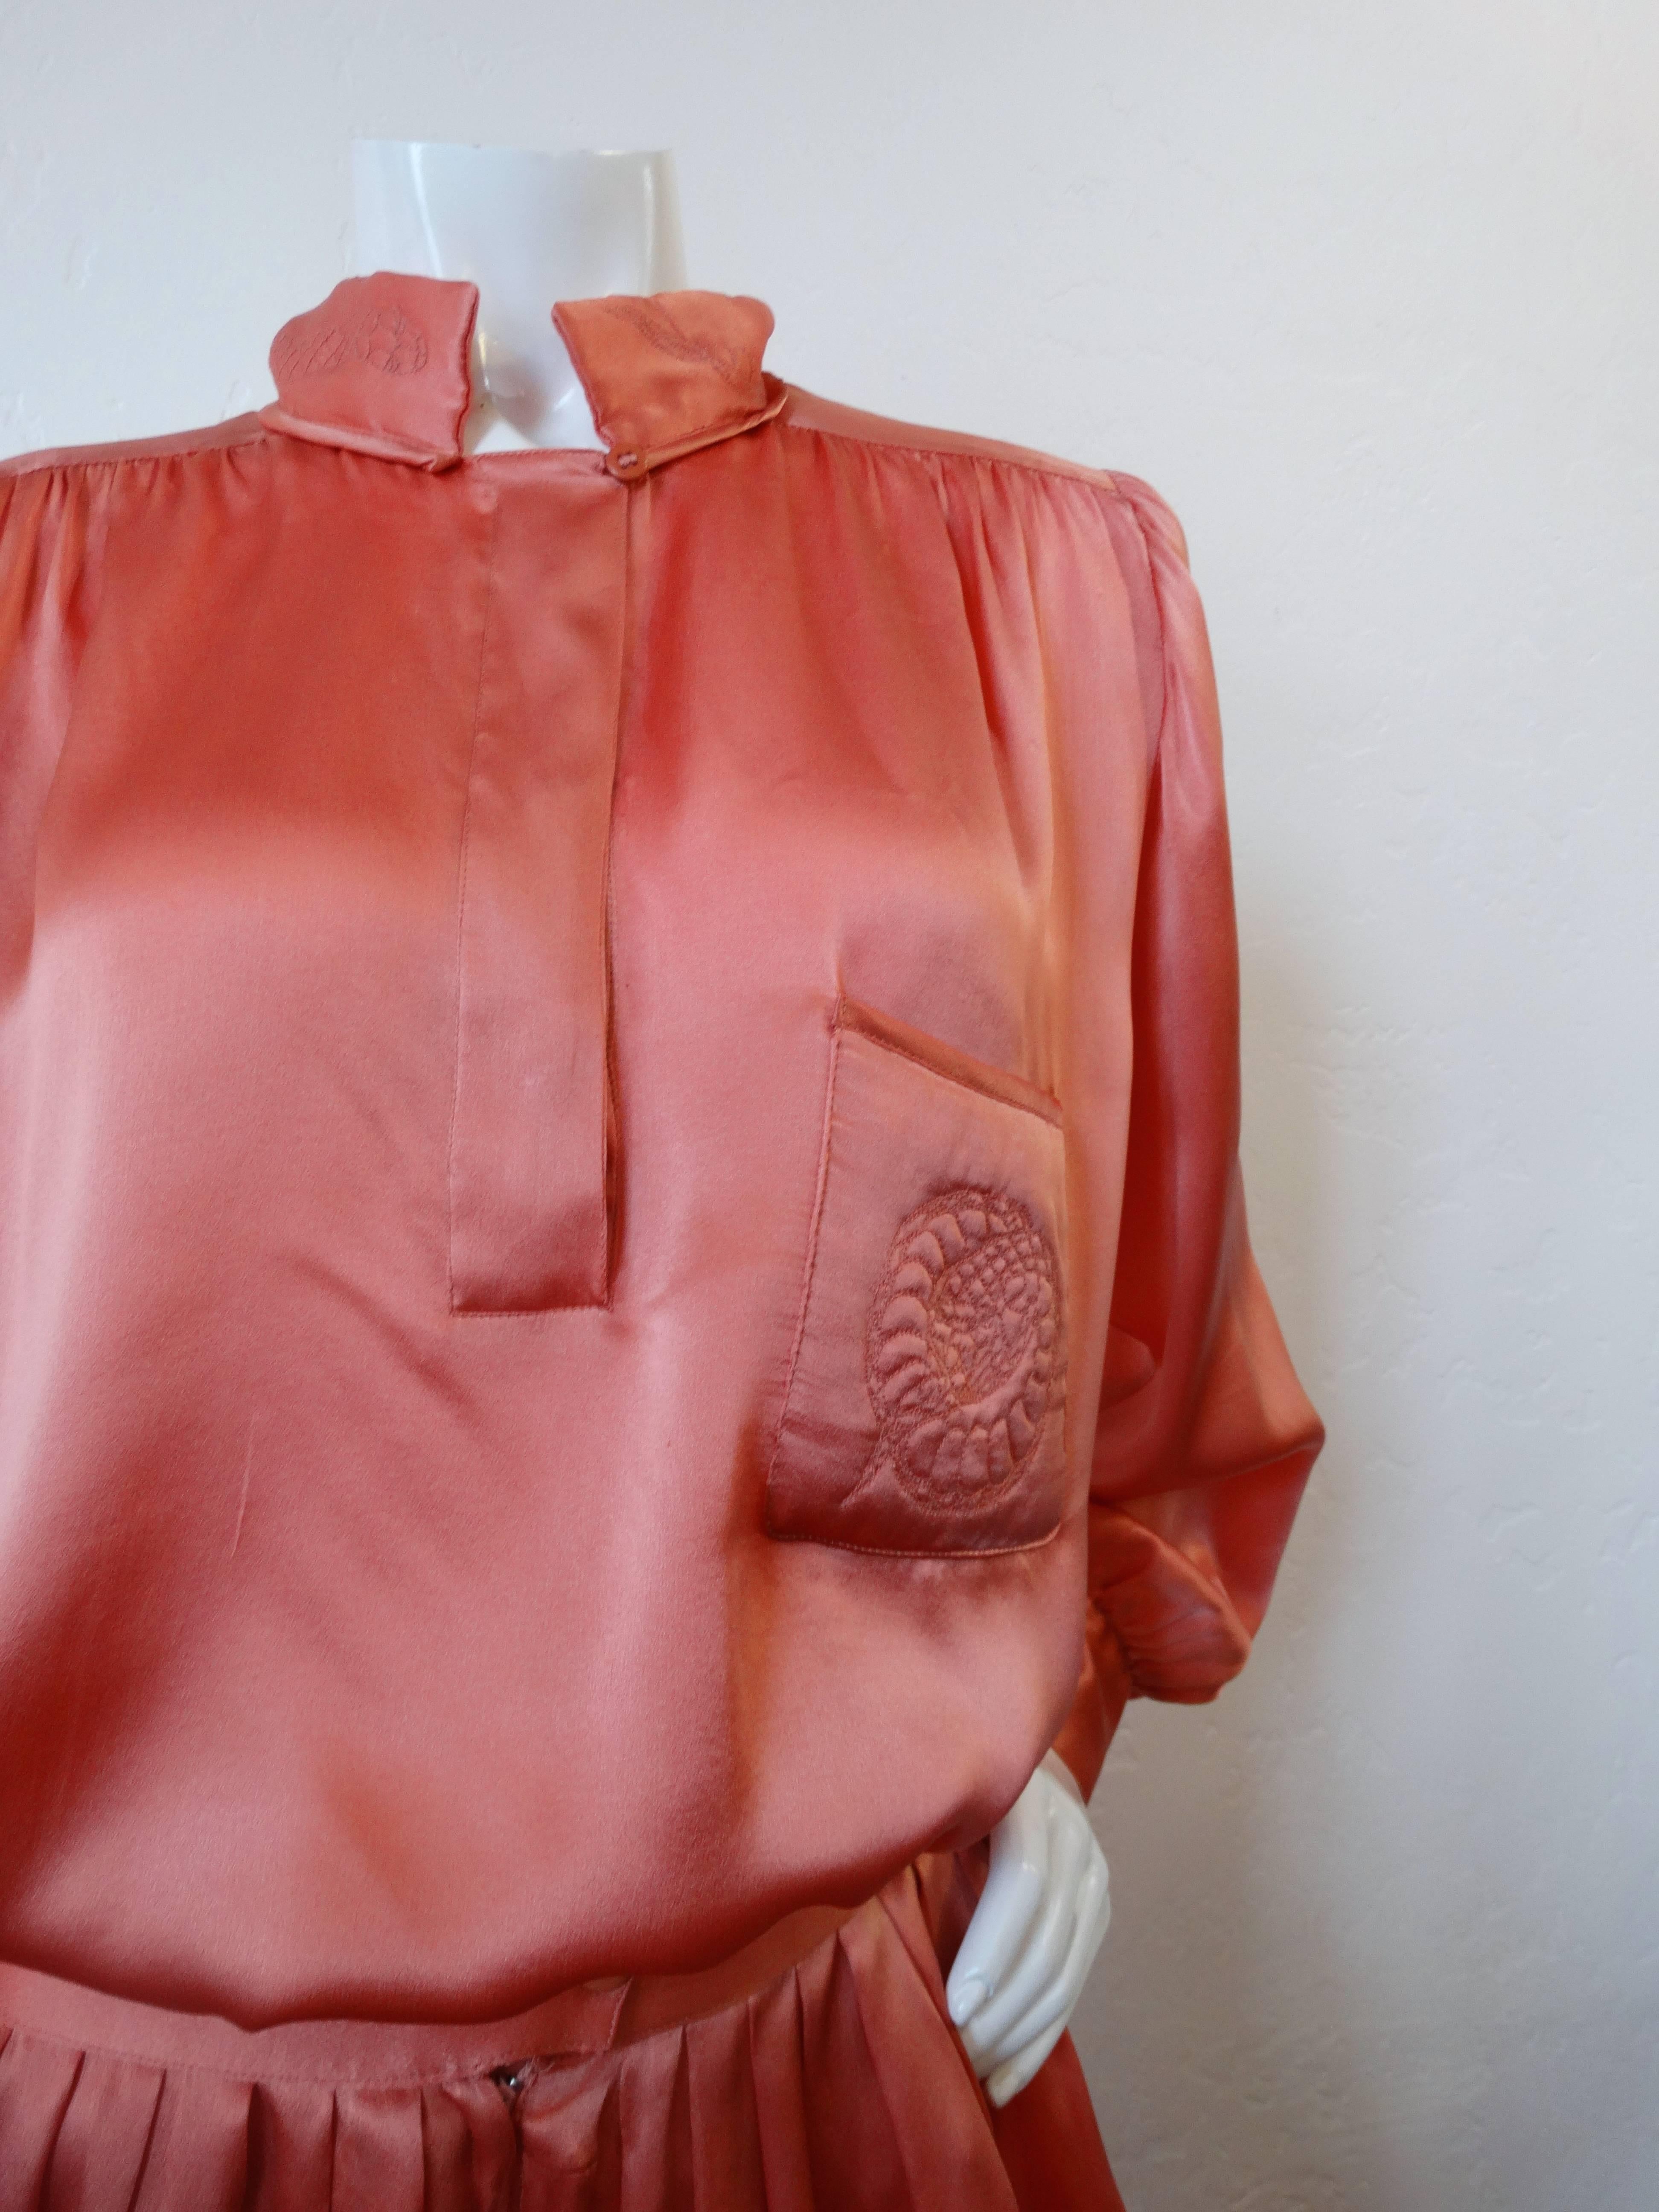 Incredible 1980s Krizia coral silk set. Snake quilted embroidery on the pocket and neckline of the blouse. Pants are high waist hammer style that tapper into a cigarette cut. Some light discoloration on the pant leg, see last detail shot.